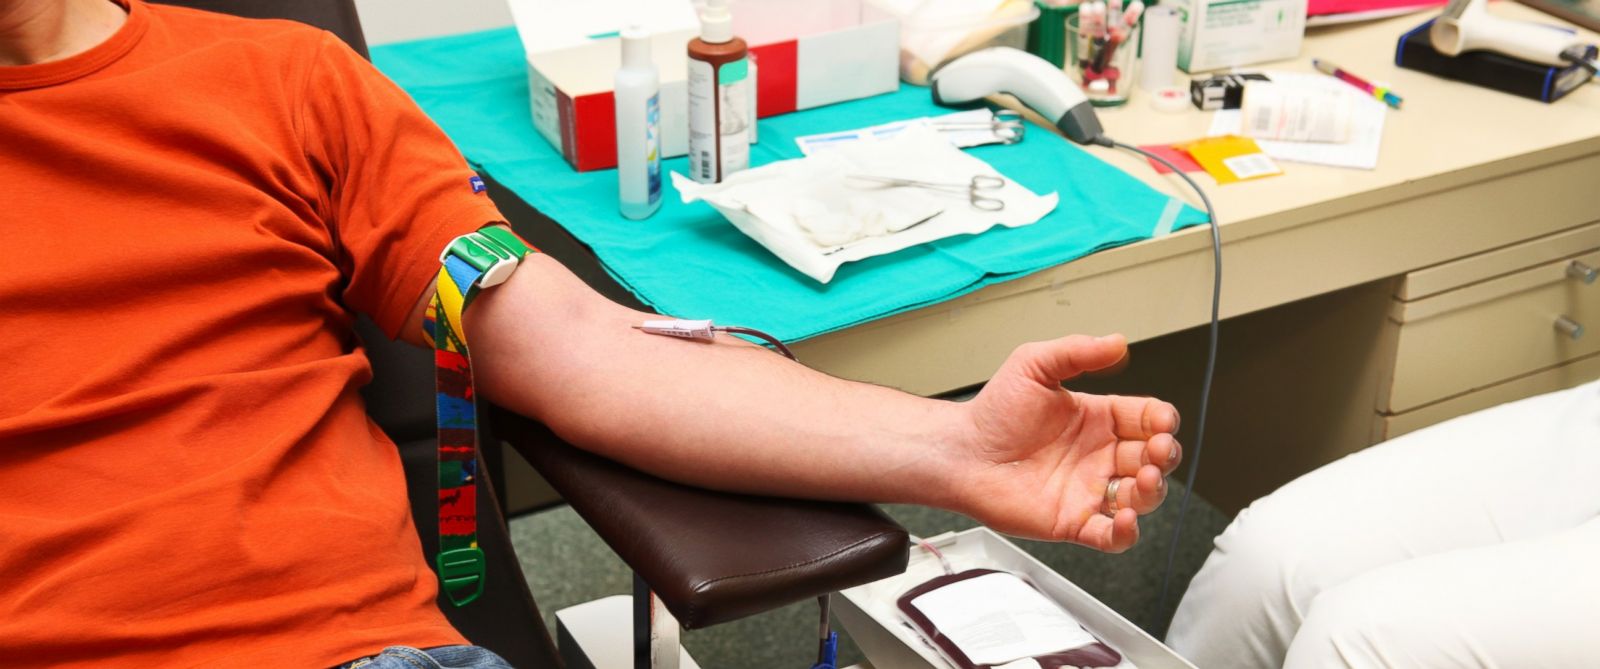 why can gay men donate blood one day a year